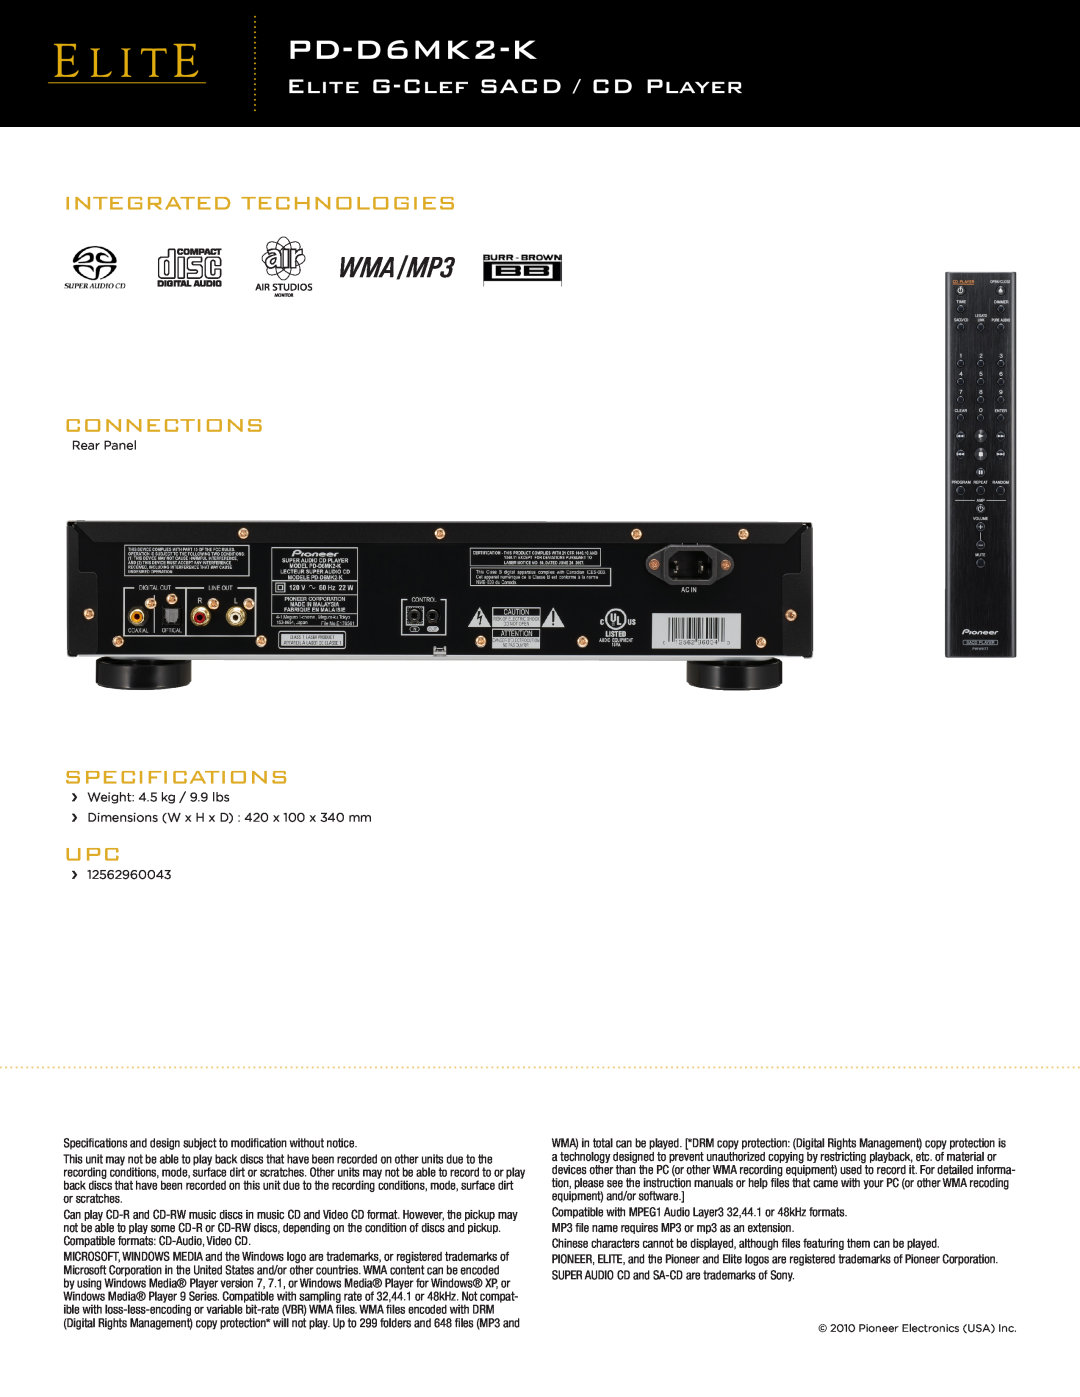 Pioneer PD-D6MK2-K PDDV-58AVD6MK2-K, Elite G-Clefsacd / Cd Player, Integrated Technologies Connections, Specifications 